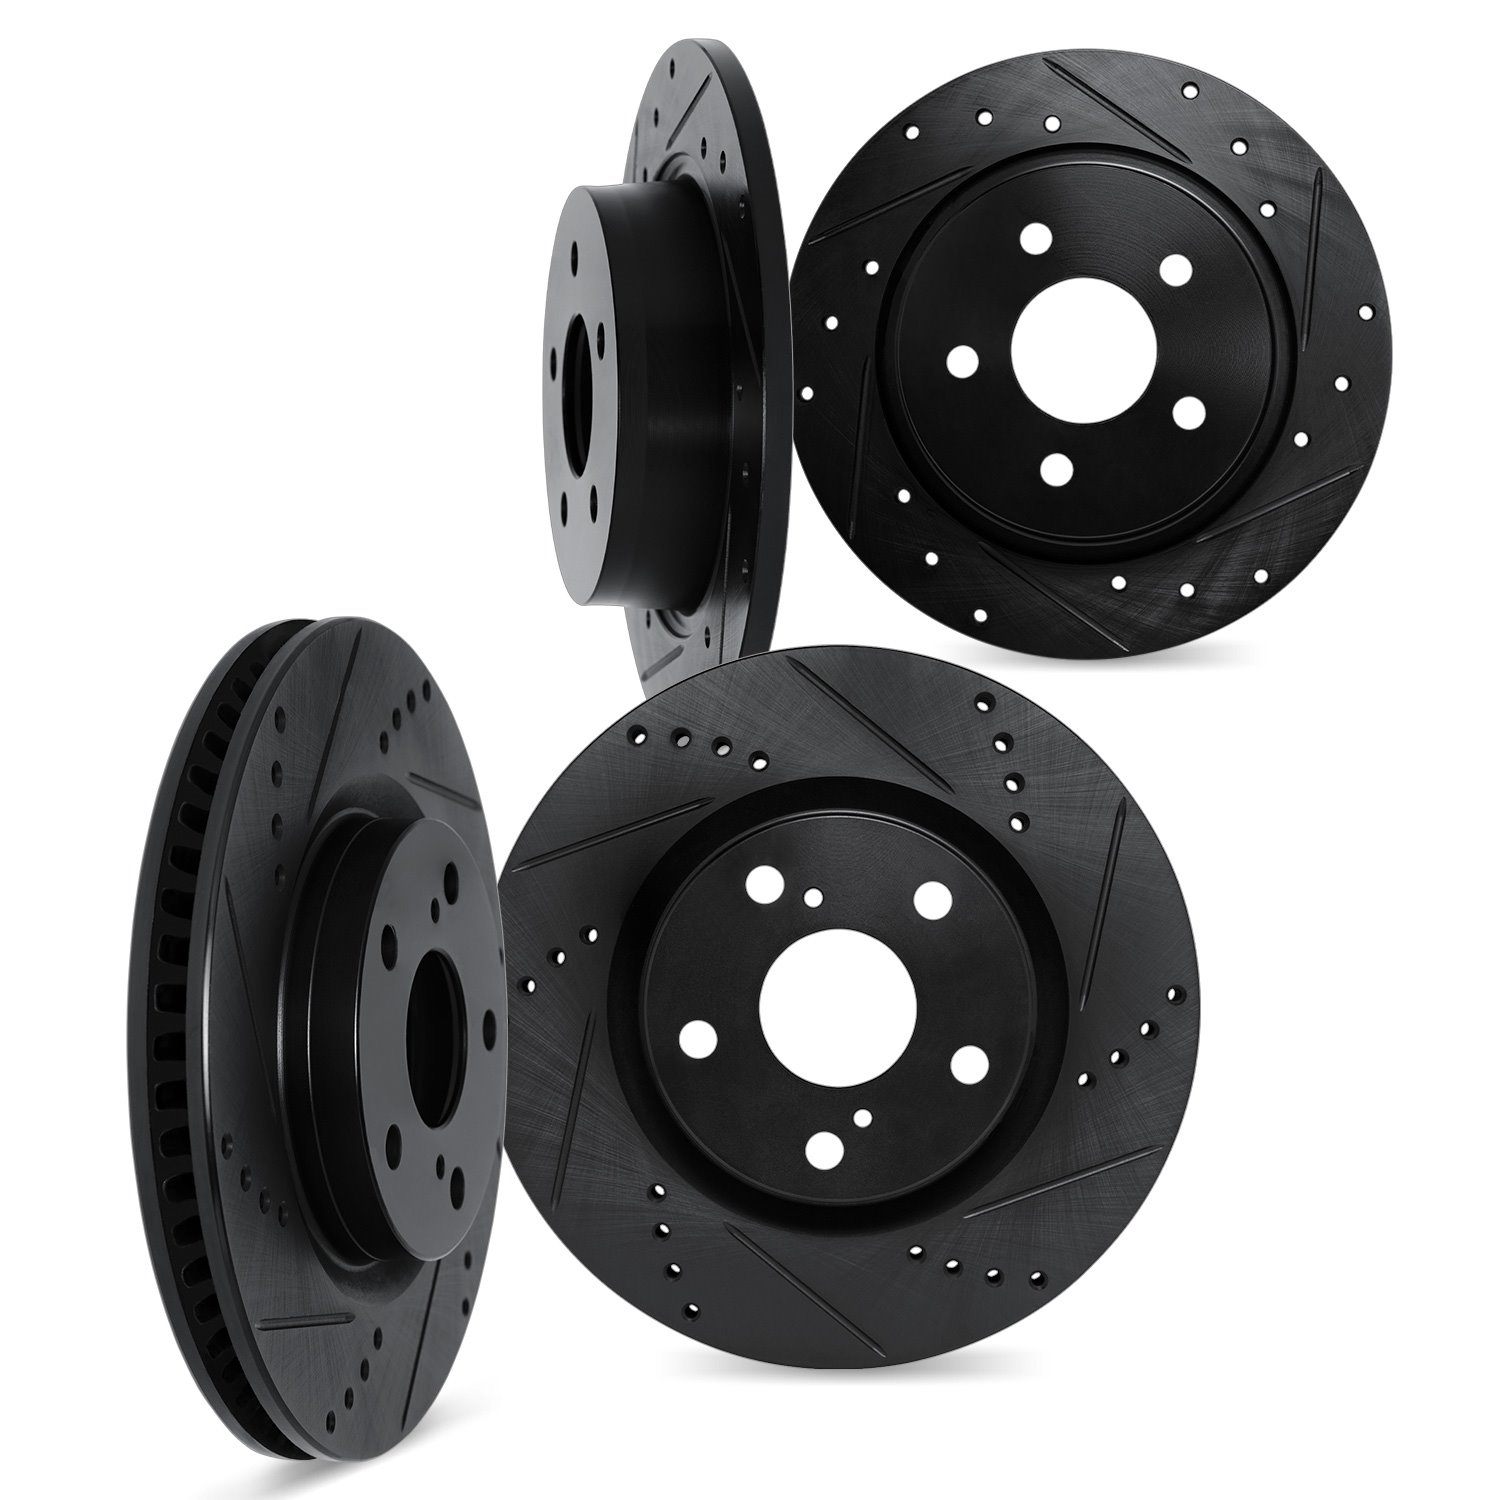 8004-74056 Drilled/Slotted Brake Rotors [Black], 1998-1998 Audi/Volkswagen, Position: Front and Rear